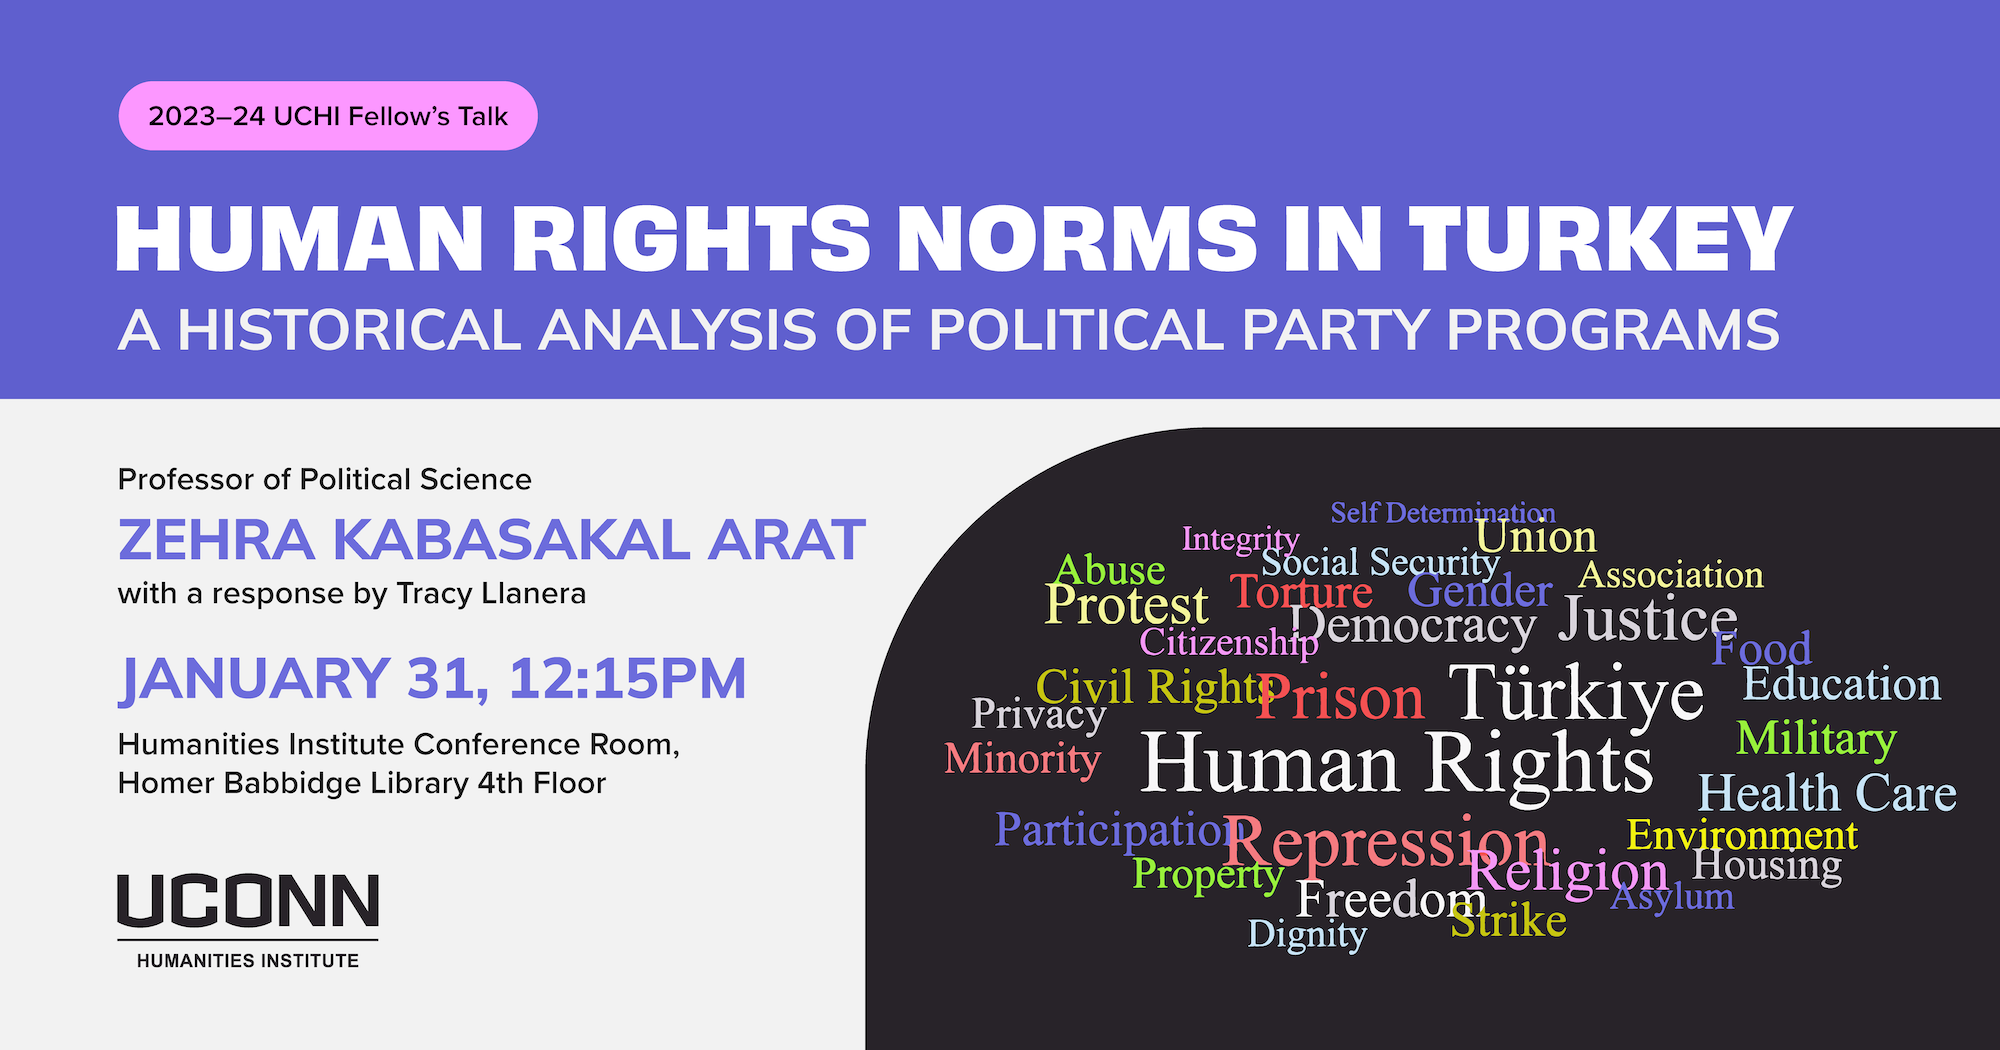 2023–24 UCHI Fellow's Talk. "Human Rights Norms in Turkey: A Historical Analysis of Political Party Programs," Professof of Political Science, UConn, Zehra Kabaskal Arat, with a response by Tracy Llanera. January 31, 12:15pm. Humanities Institute Conference Room, Homer Babbidge Library 4th floor.